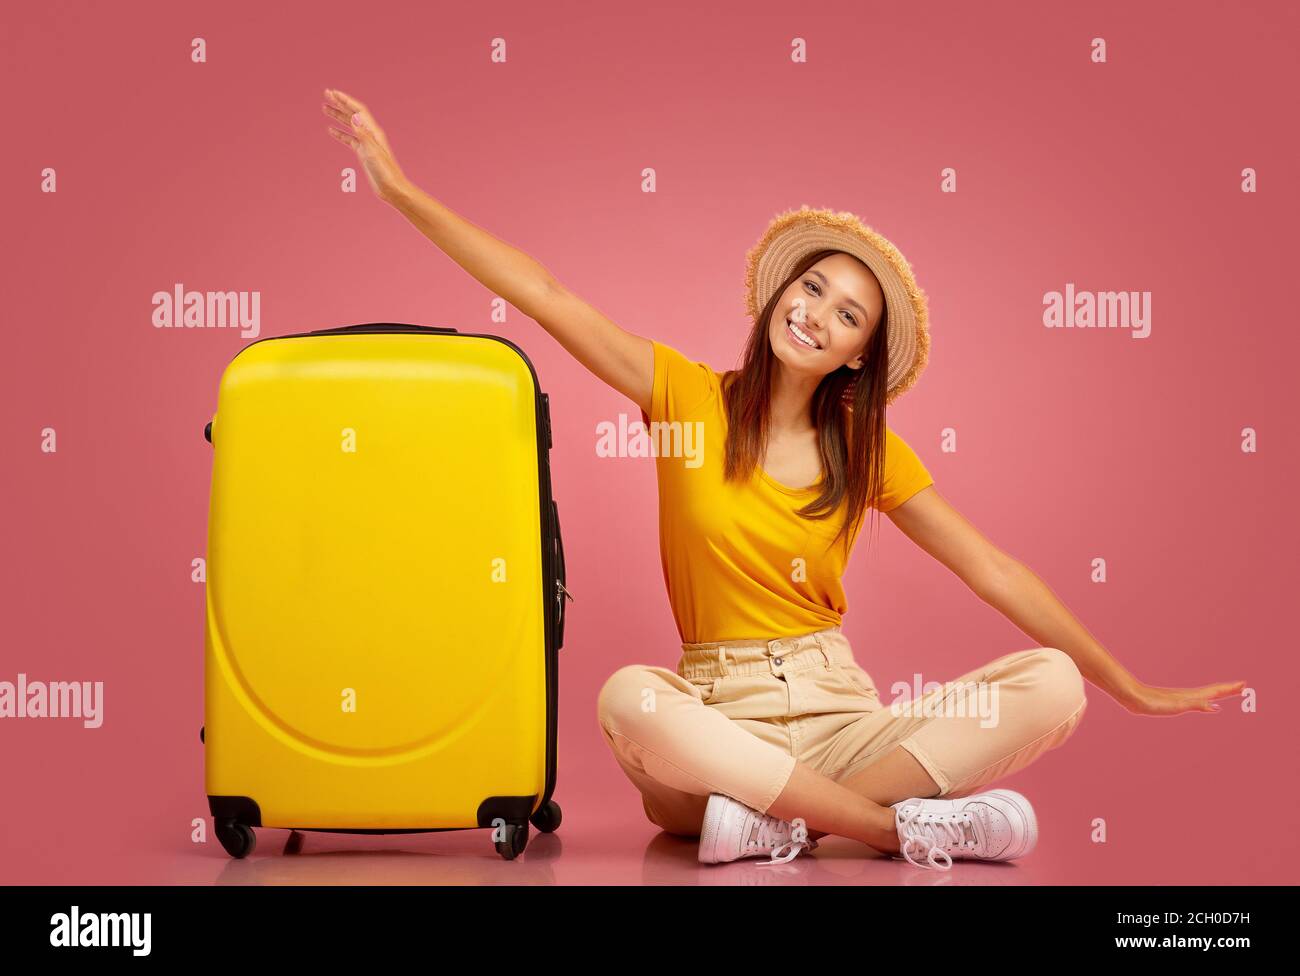 Excited girl sitting by suitcase, imitating airplane Stock Photo